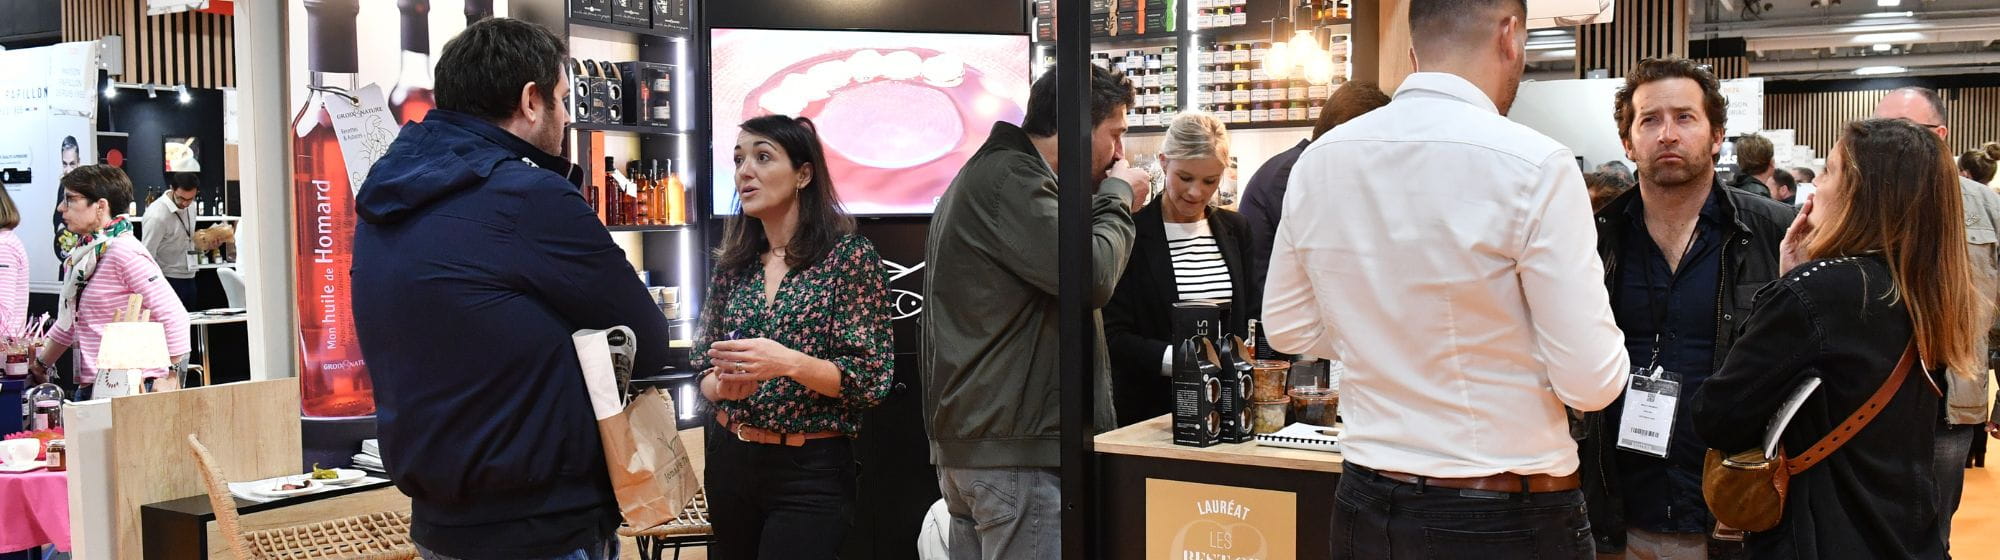 Conserverie Groix et Nature booth on Gourmet Selection